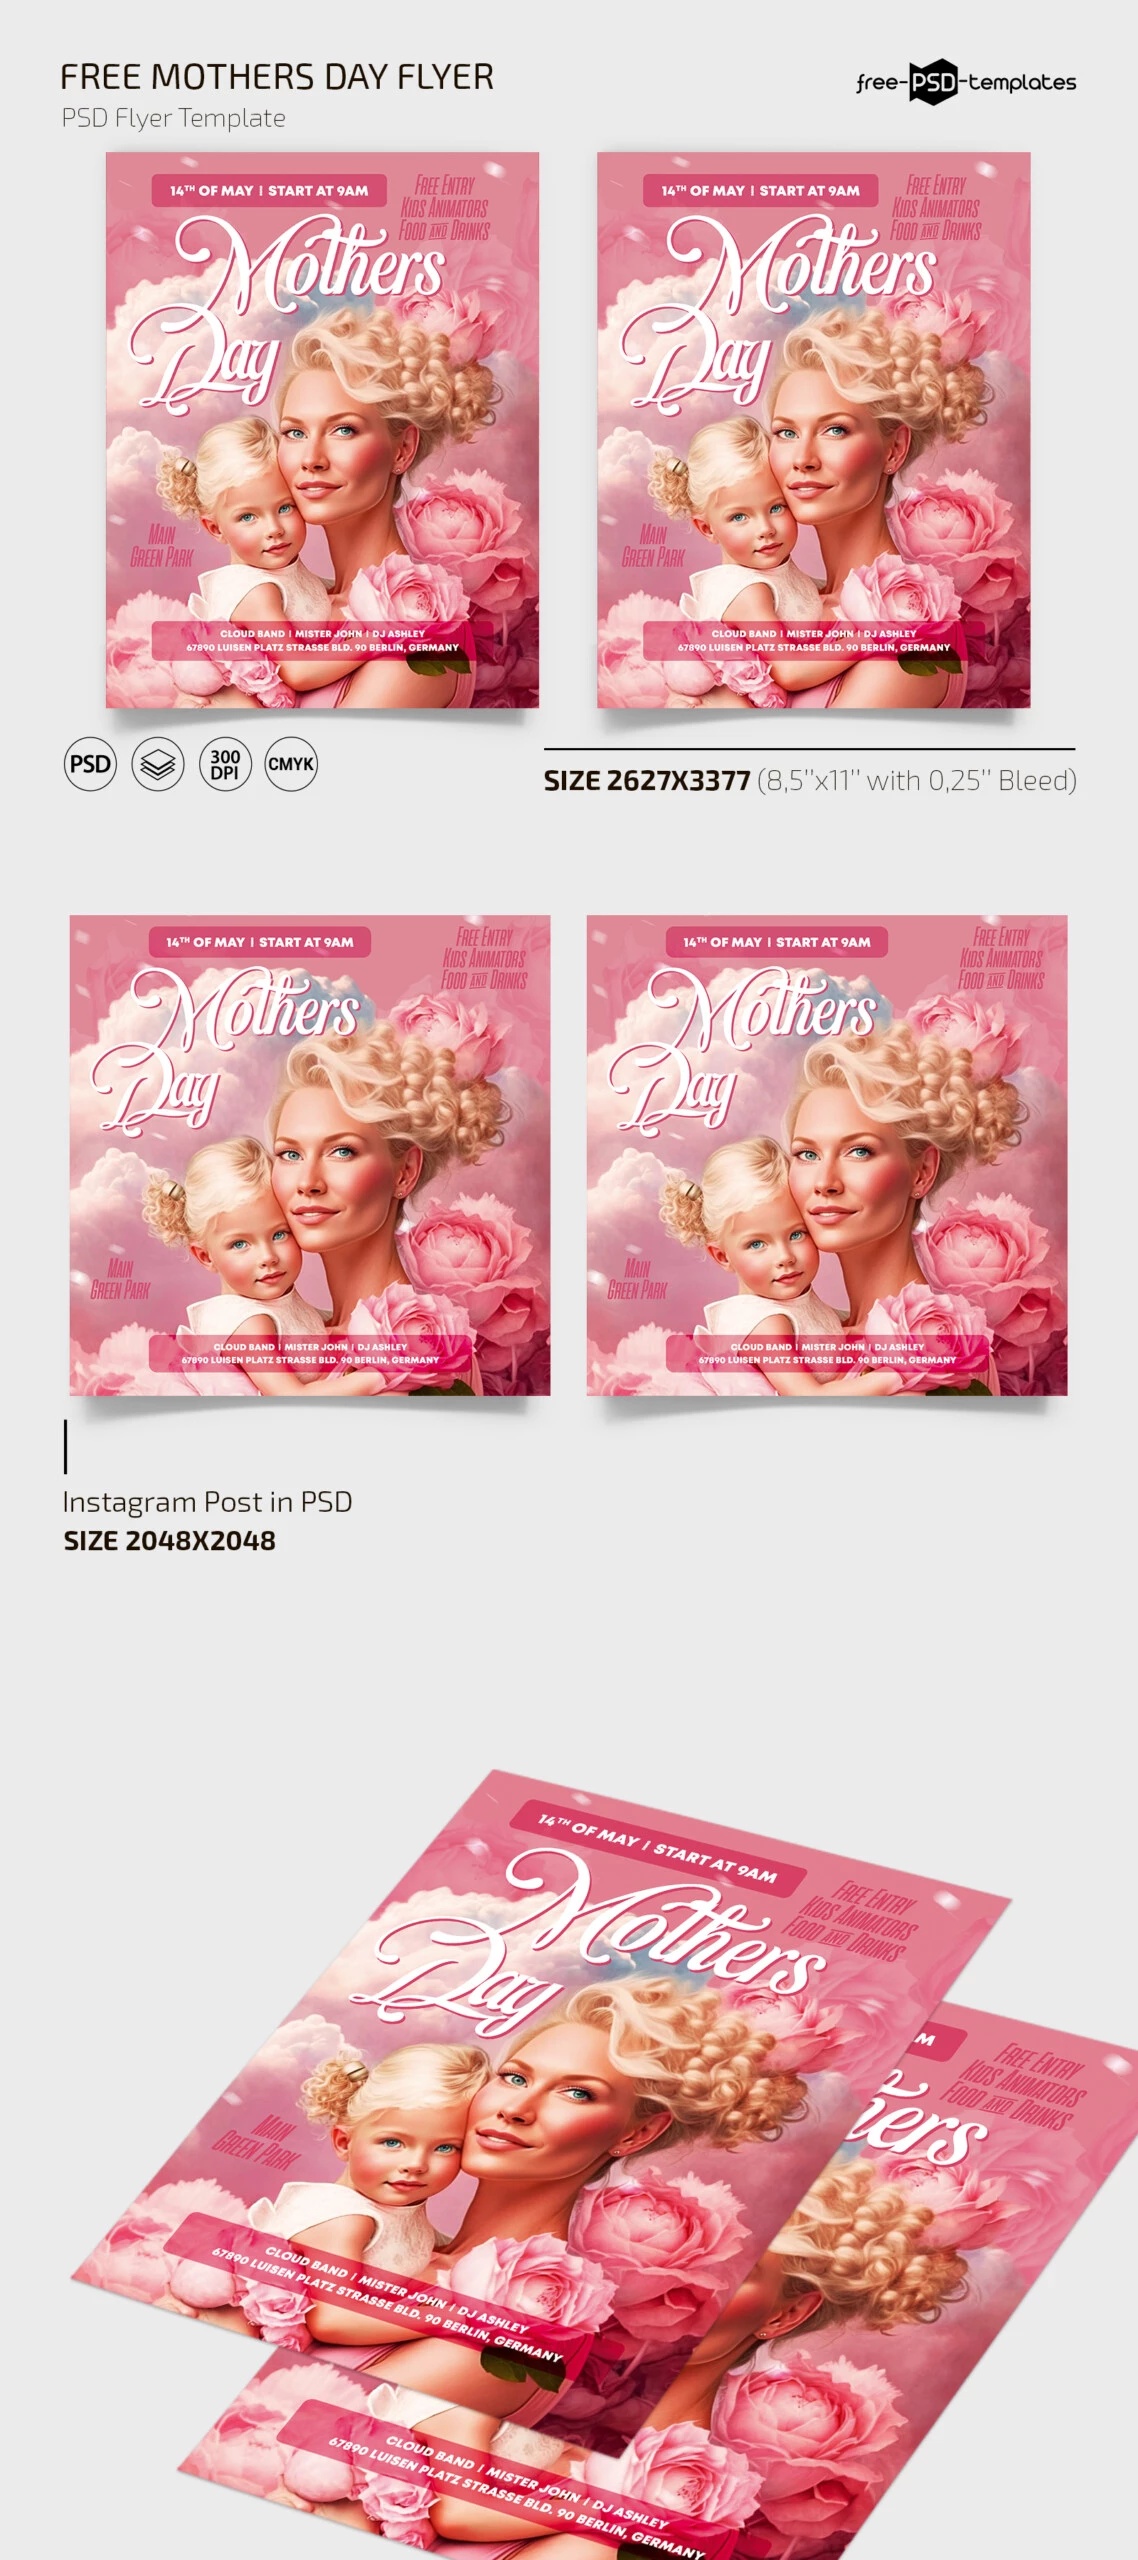 Free Mothers Day Flyer Template + Instagram Post (PSD)